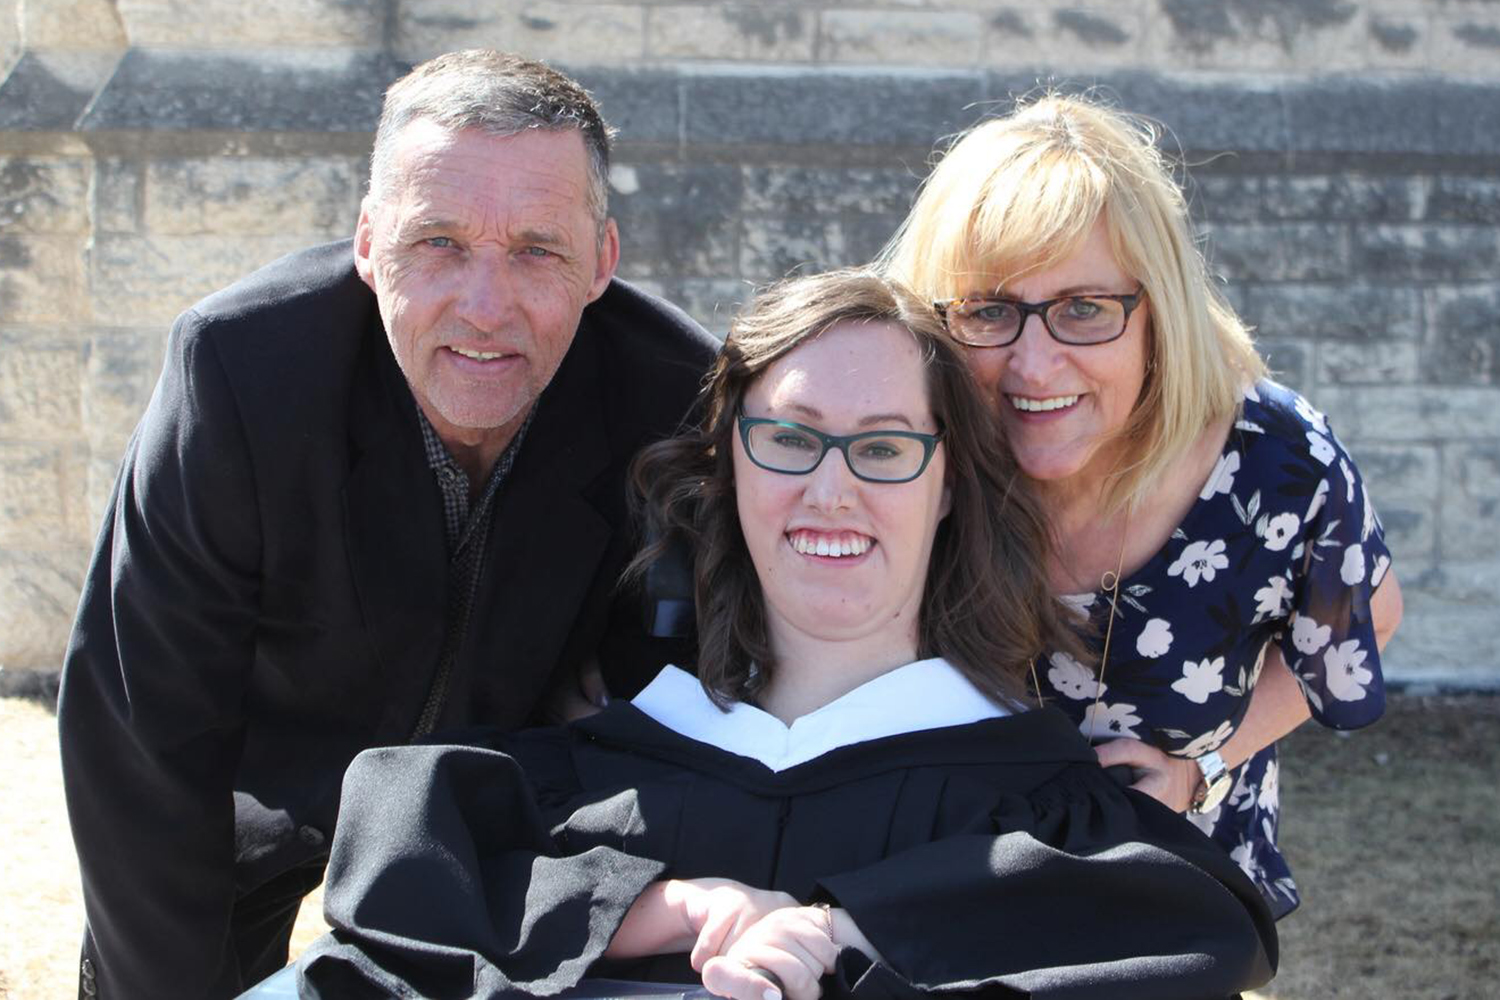 Cristina Waldner in her graduation gown surrounded by her parents on the day of her graduation from CMU.